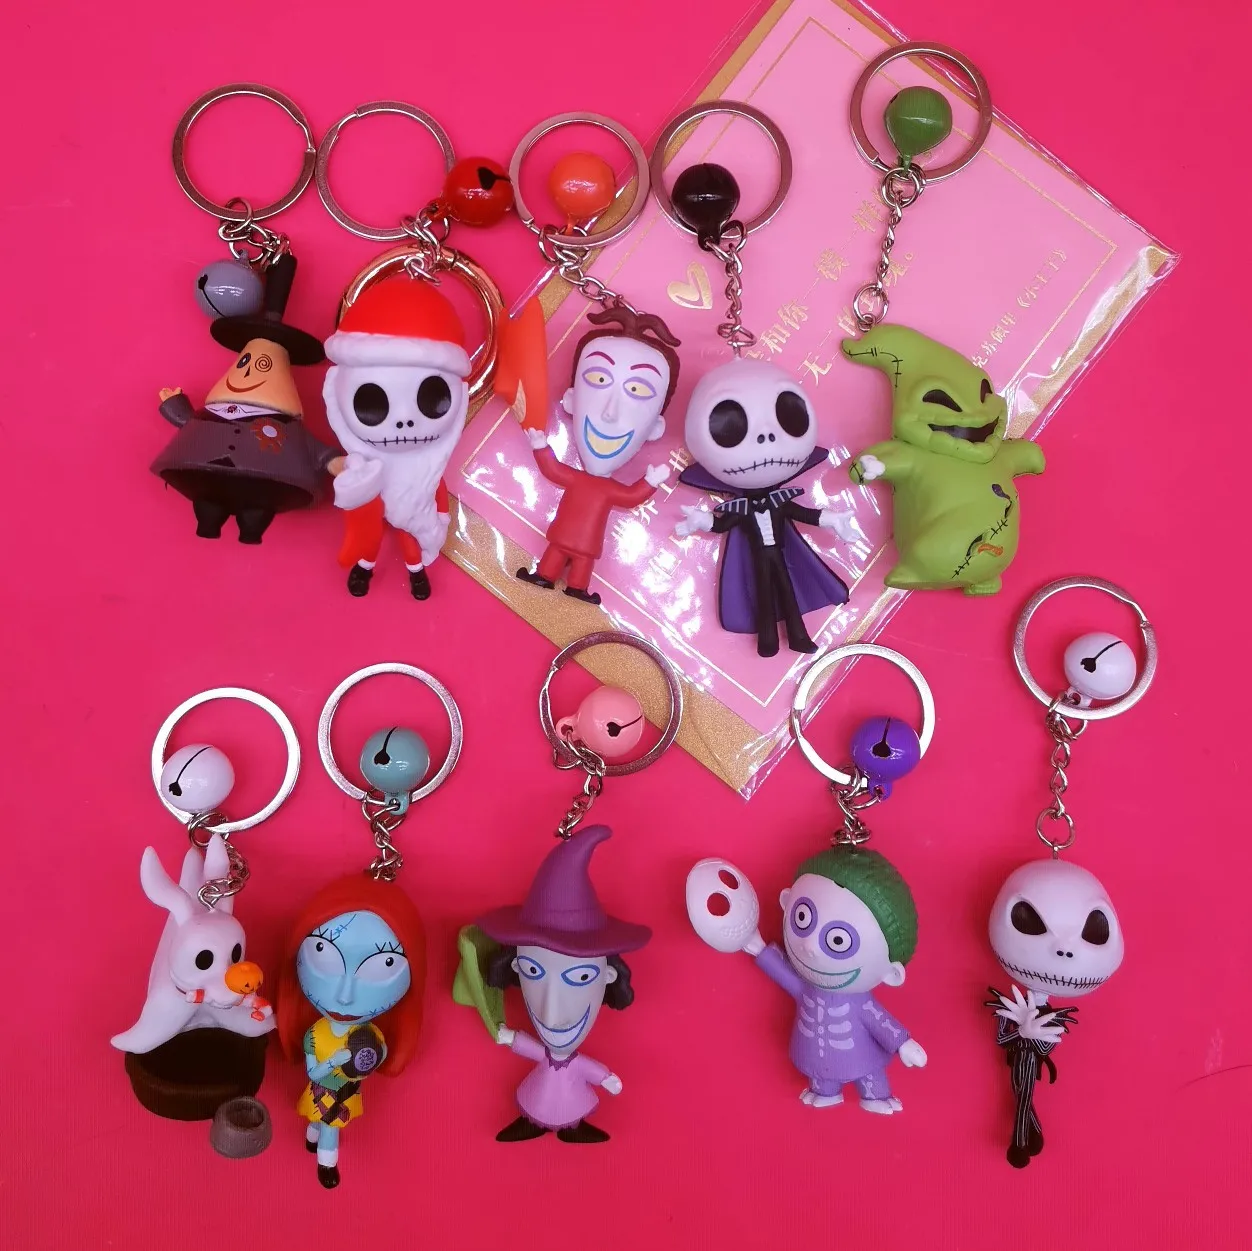 (New Arrival)Hot selling High Quality 10pcs/set PVC The Nightmare Before Christmas Jack Anime Action Figure keychain For Gift